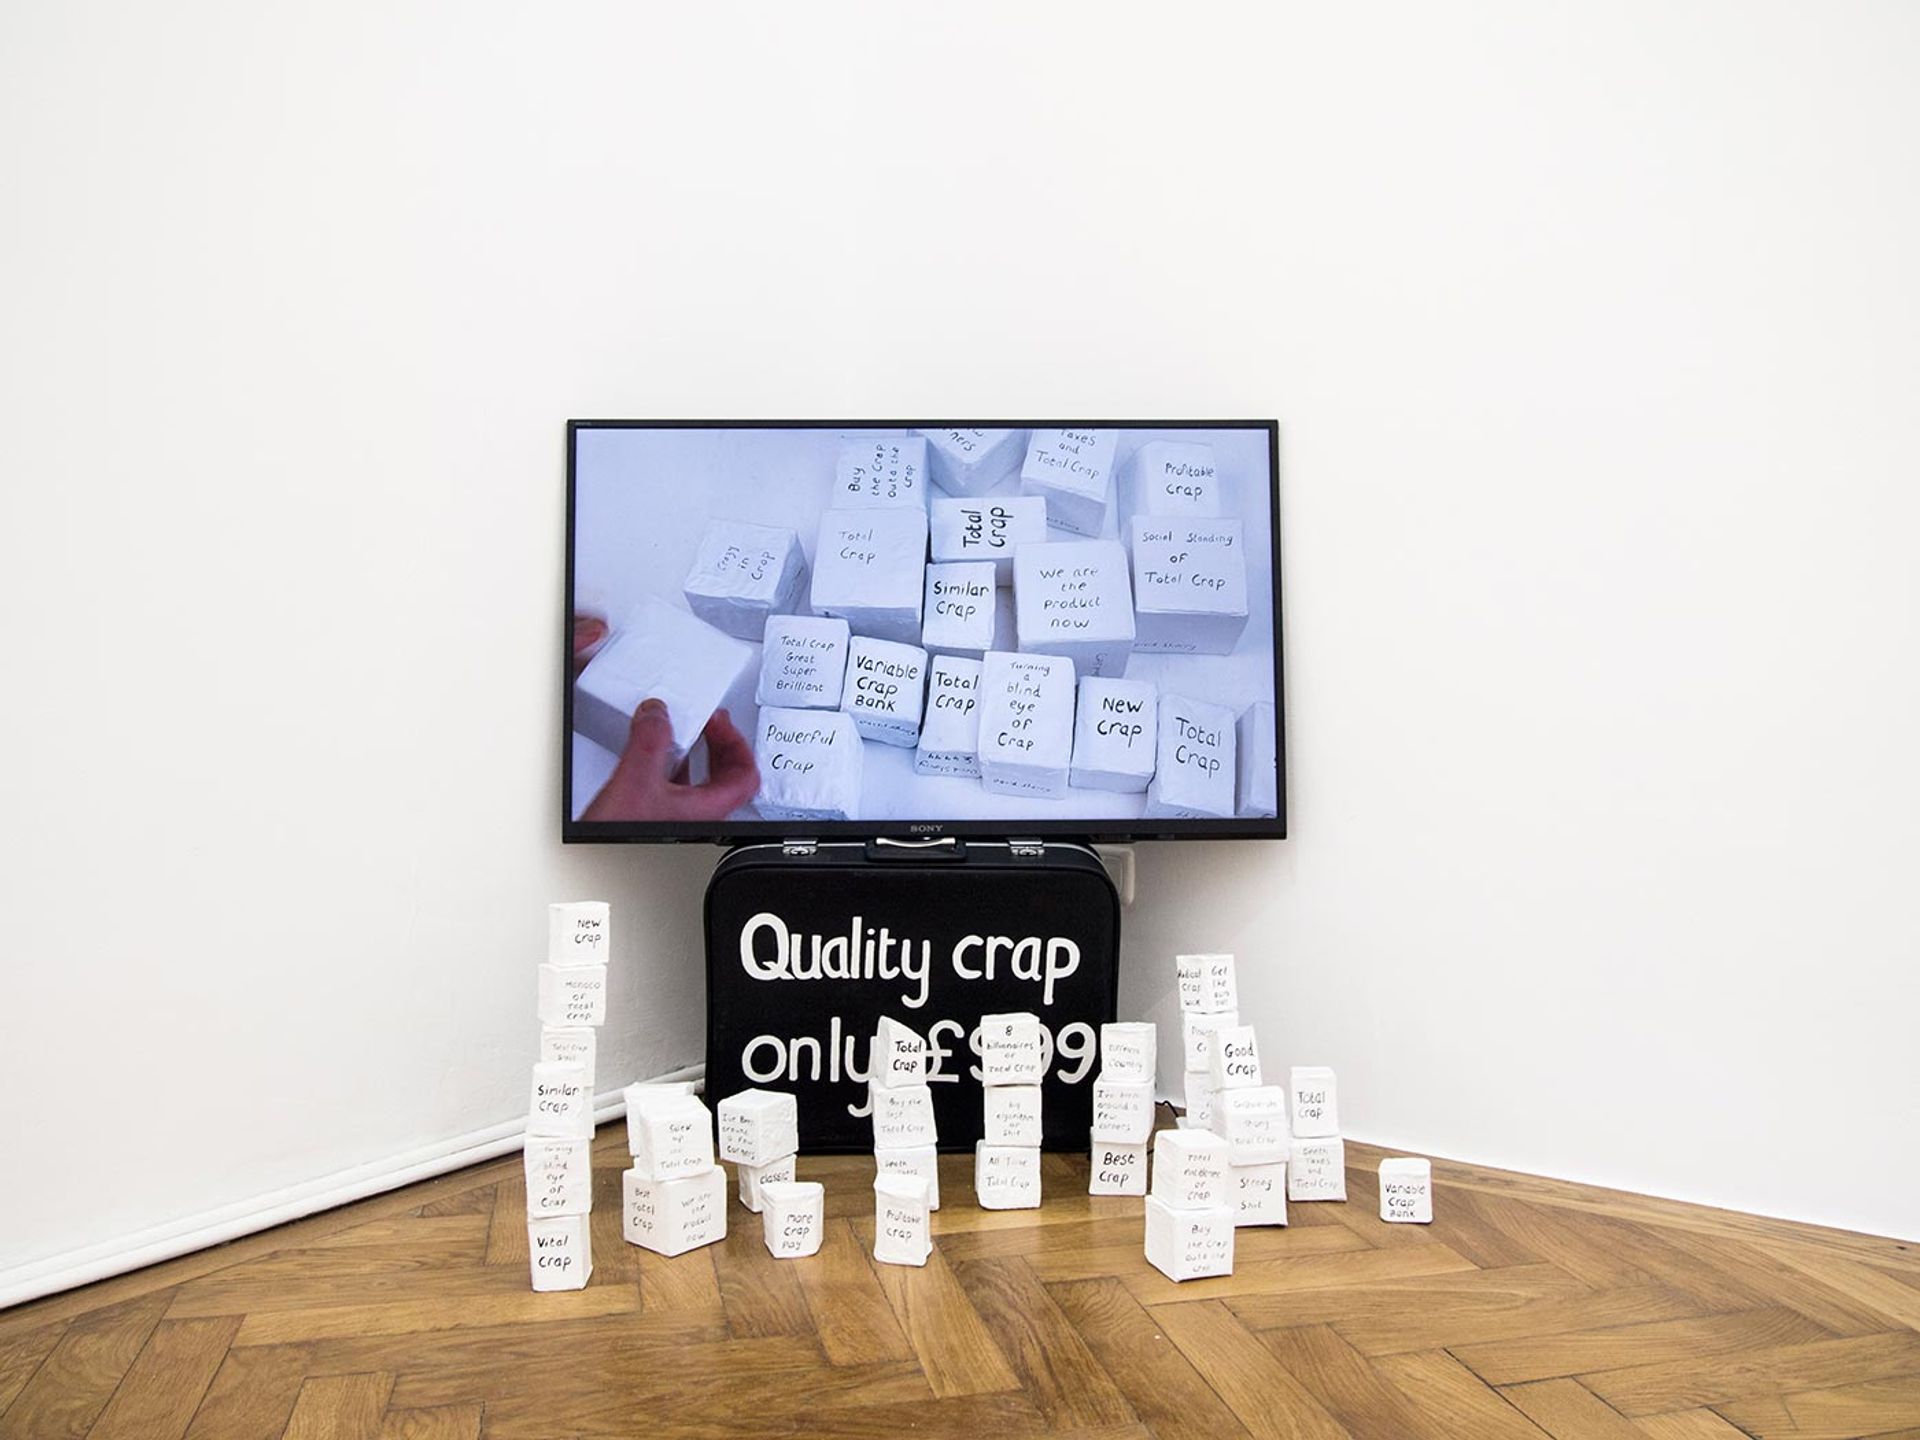 David Sherry, Quality Crap & Total Crap, painred boxes, various sizes, installation view, 2018